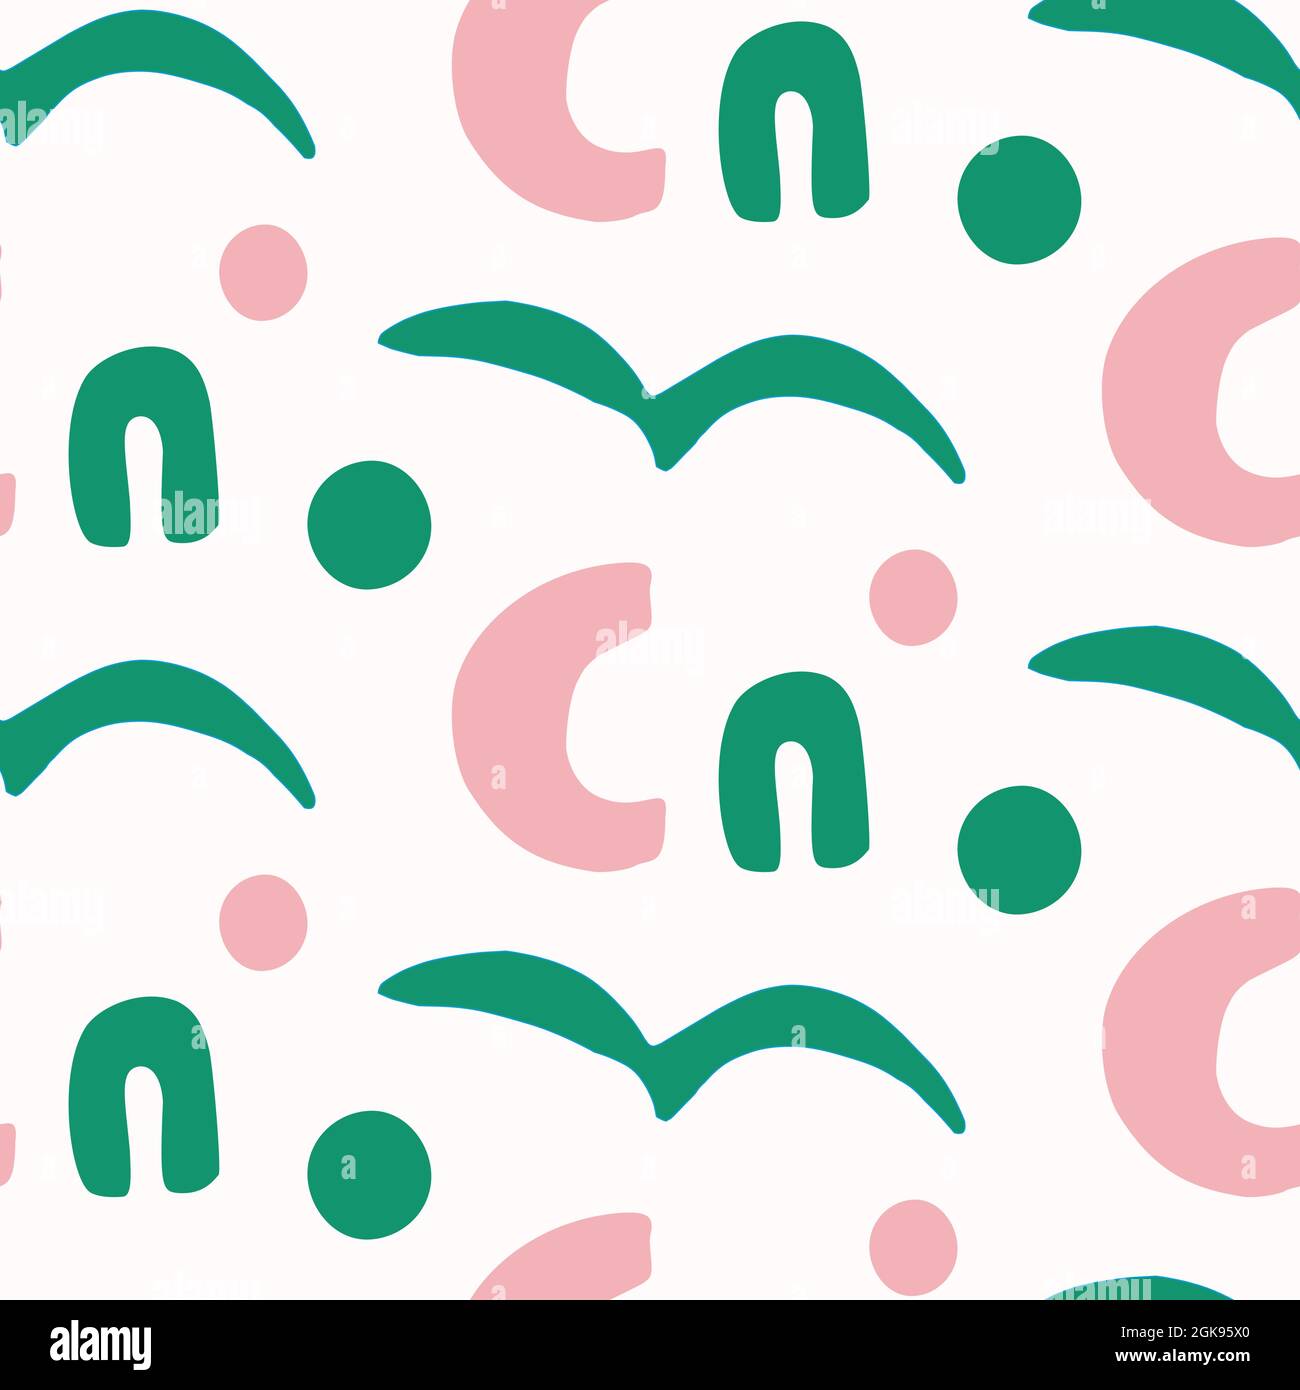 Playful fresh geo doodle shape seamless background. Modern trendy minimal retro style motif pattern. Hand drawn simple colorful design isolated on Stock Vector